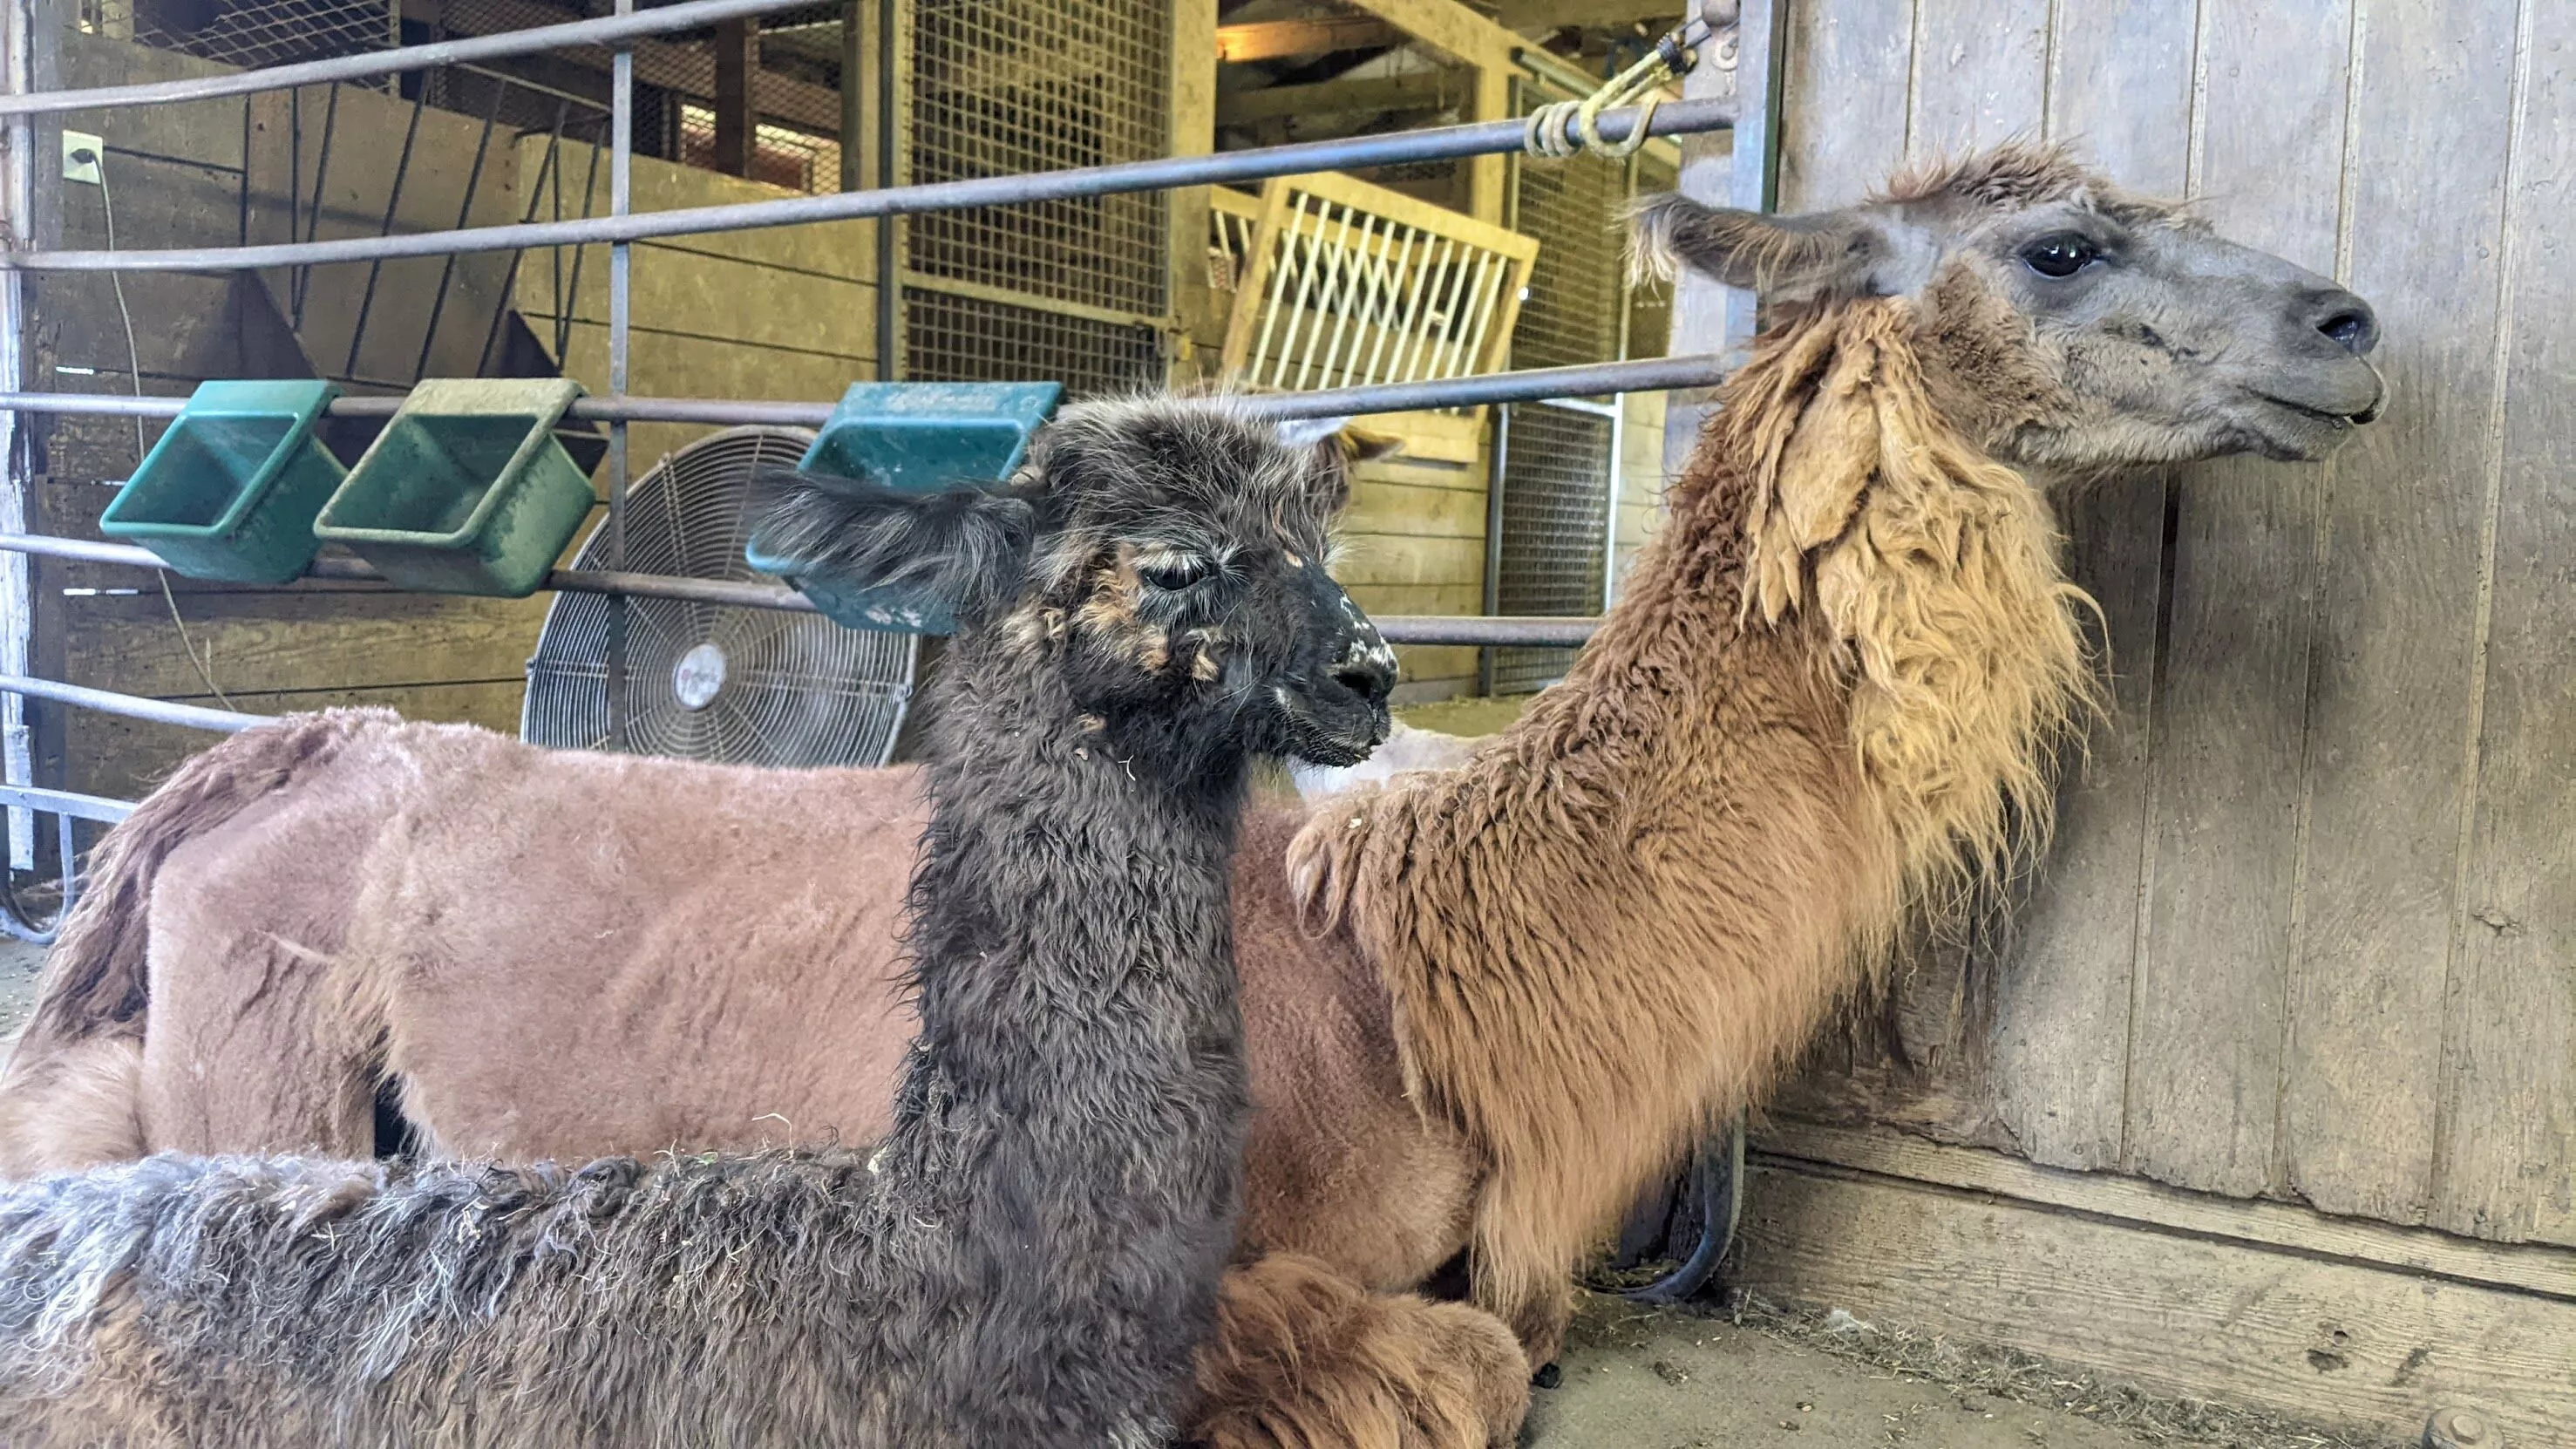 An image of a llama named Florian and her mother, Outsourced